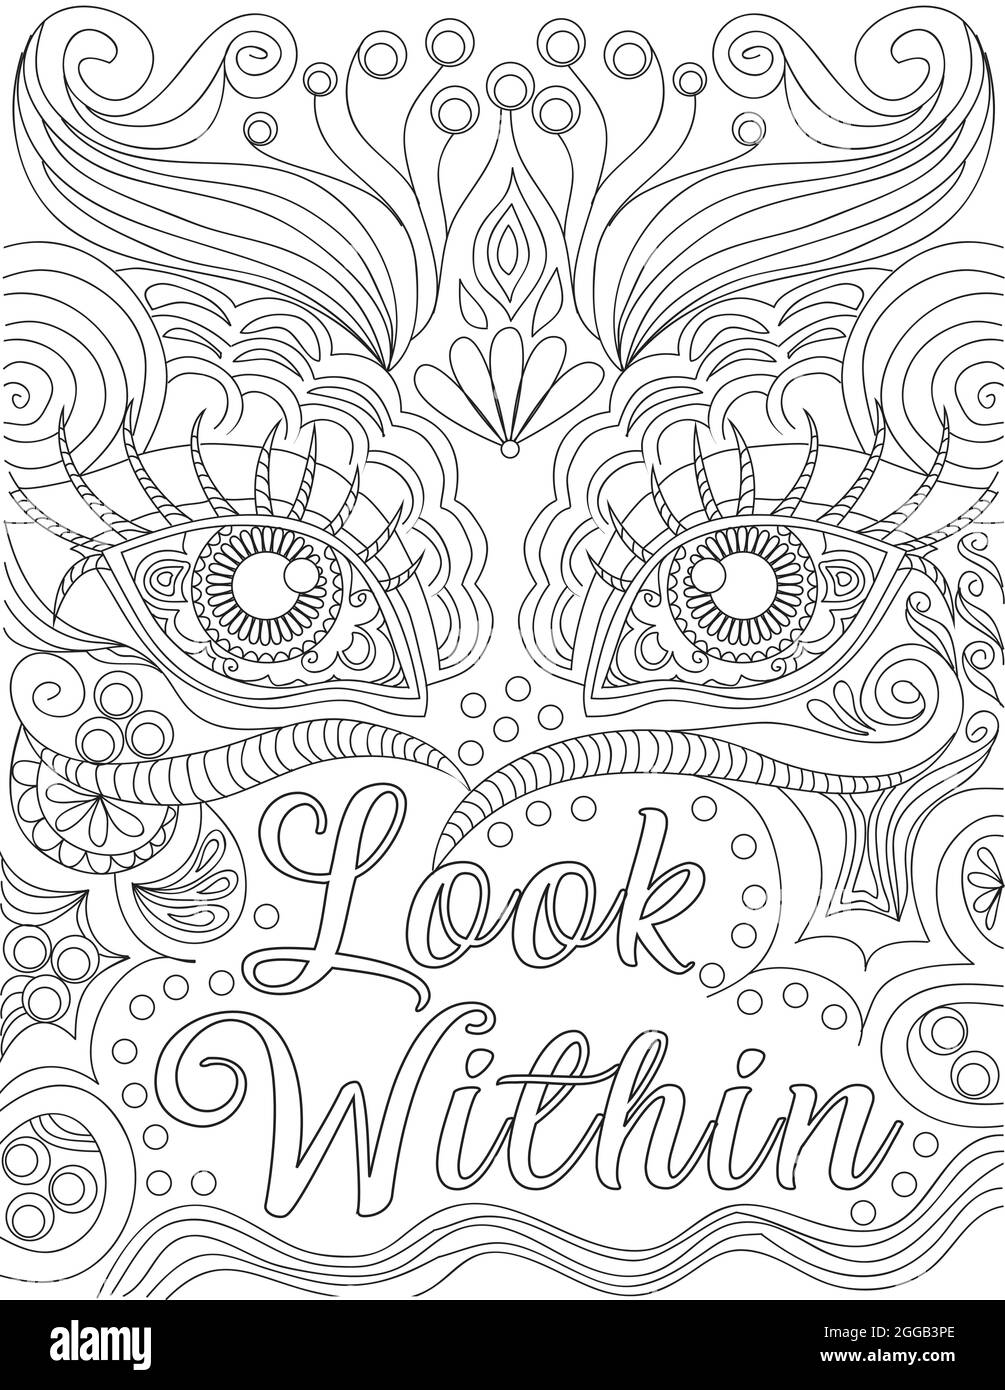 Appealing Eyes Line Drawing Behind The Positive Letter Message Written Look Within. Beautiful Drawing Of Half Face Backside Of Inspirational Vibe Note Stock Vector